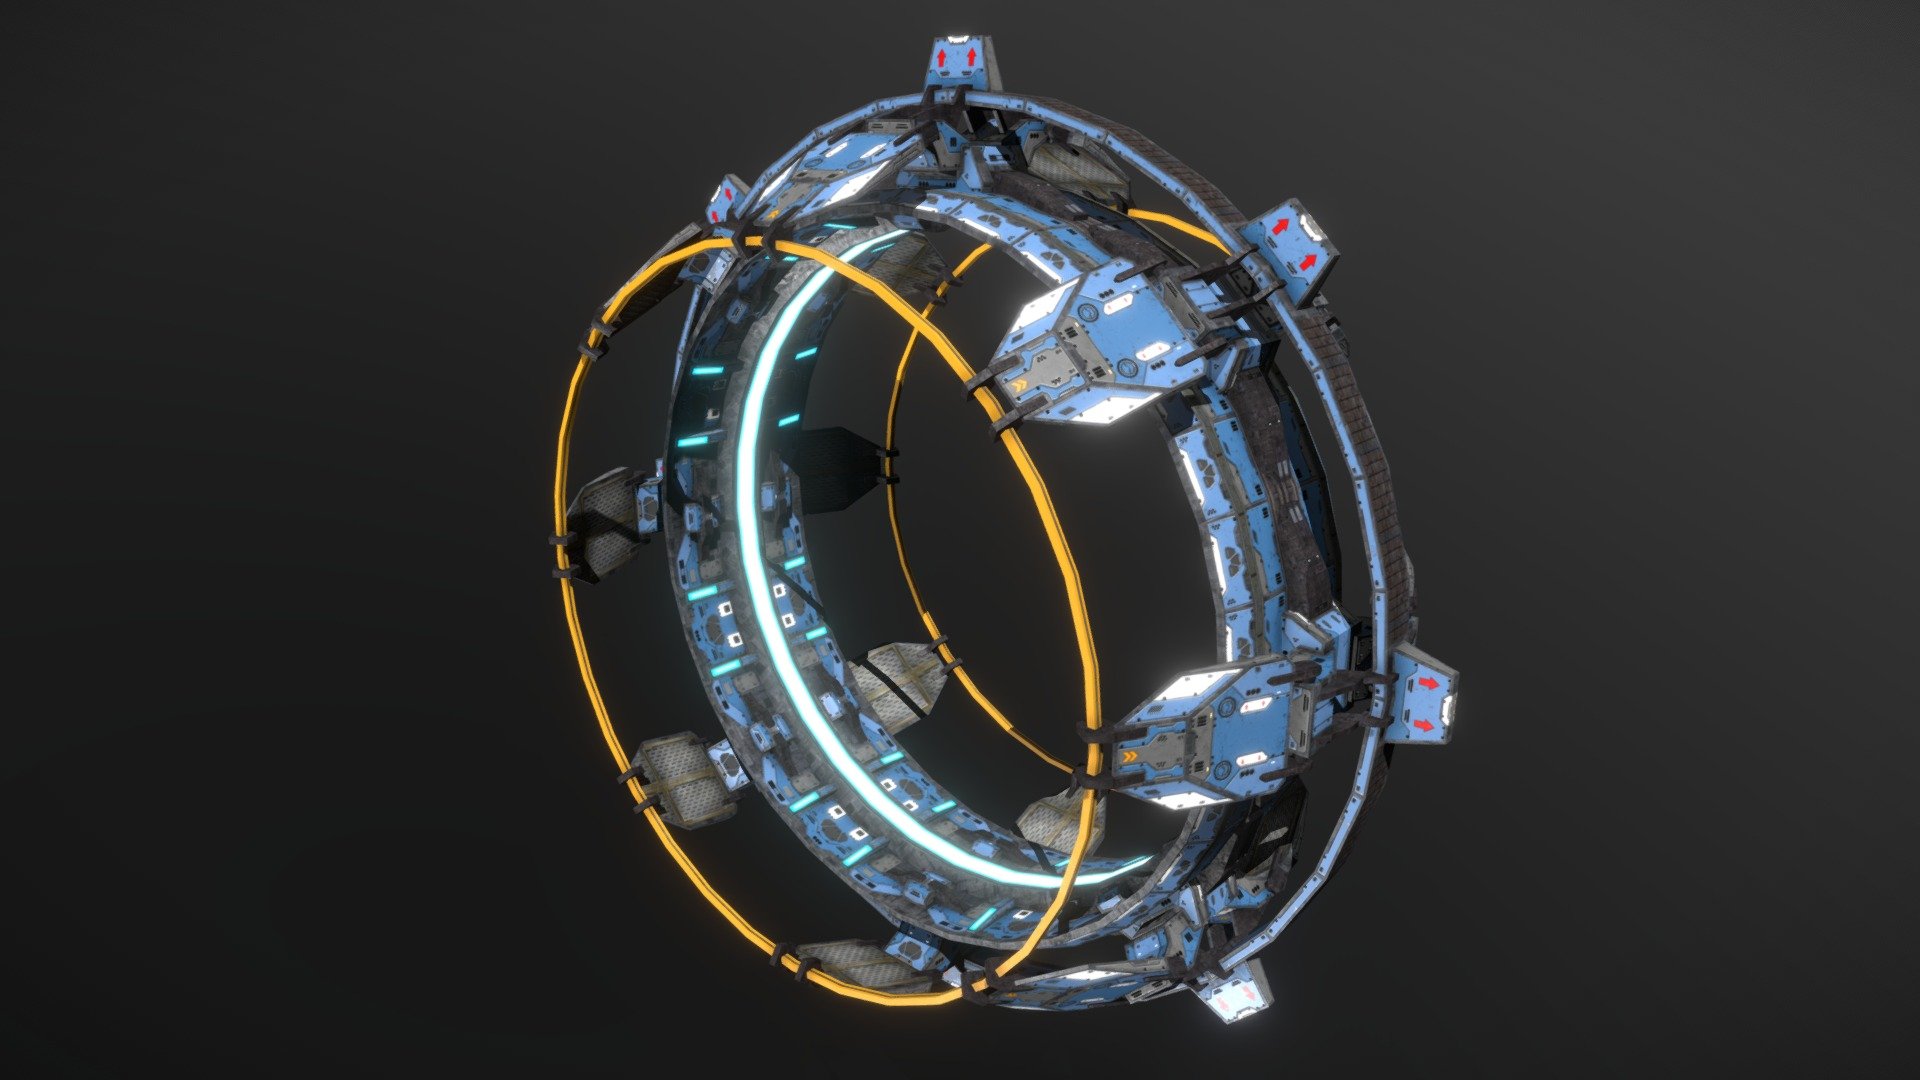 This is a model of a low-poly and game-ready scifi jumpgate. 

The weapons are separate meshes and can be animated with a keyframe animation tool. The weapon loadout can be changed as well.

The model comes with several differently colored texture sets. The PSD file with intact layers is included too.

Please note: The textures in the Sketchfab viewer have a reduced resolution to improve Sketchfab loading speed.

If you have purchased this model please make sure to download the “additional file”.  It contains FBX and OBJ meshes, full resolution textures and the source PSDs with intact layers. The meshes are separate and can be animated (e.g. firing animations for gun barrels, rotating turrets, etc) 3d model